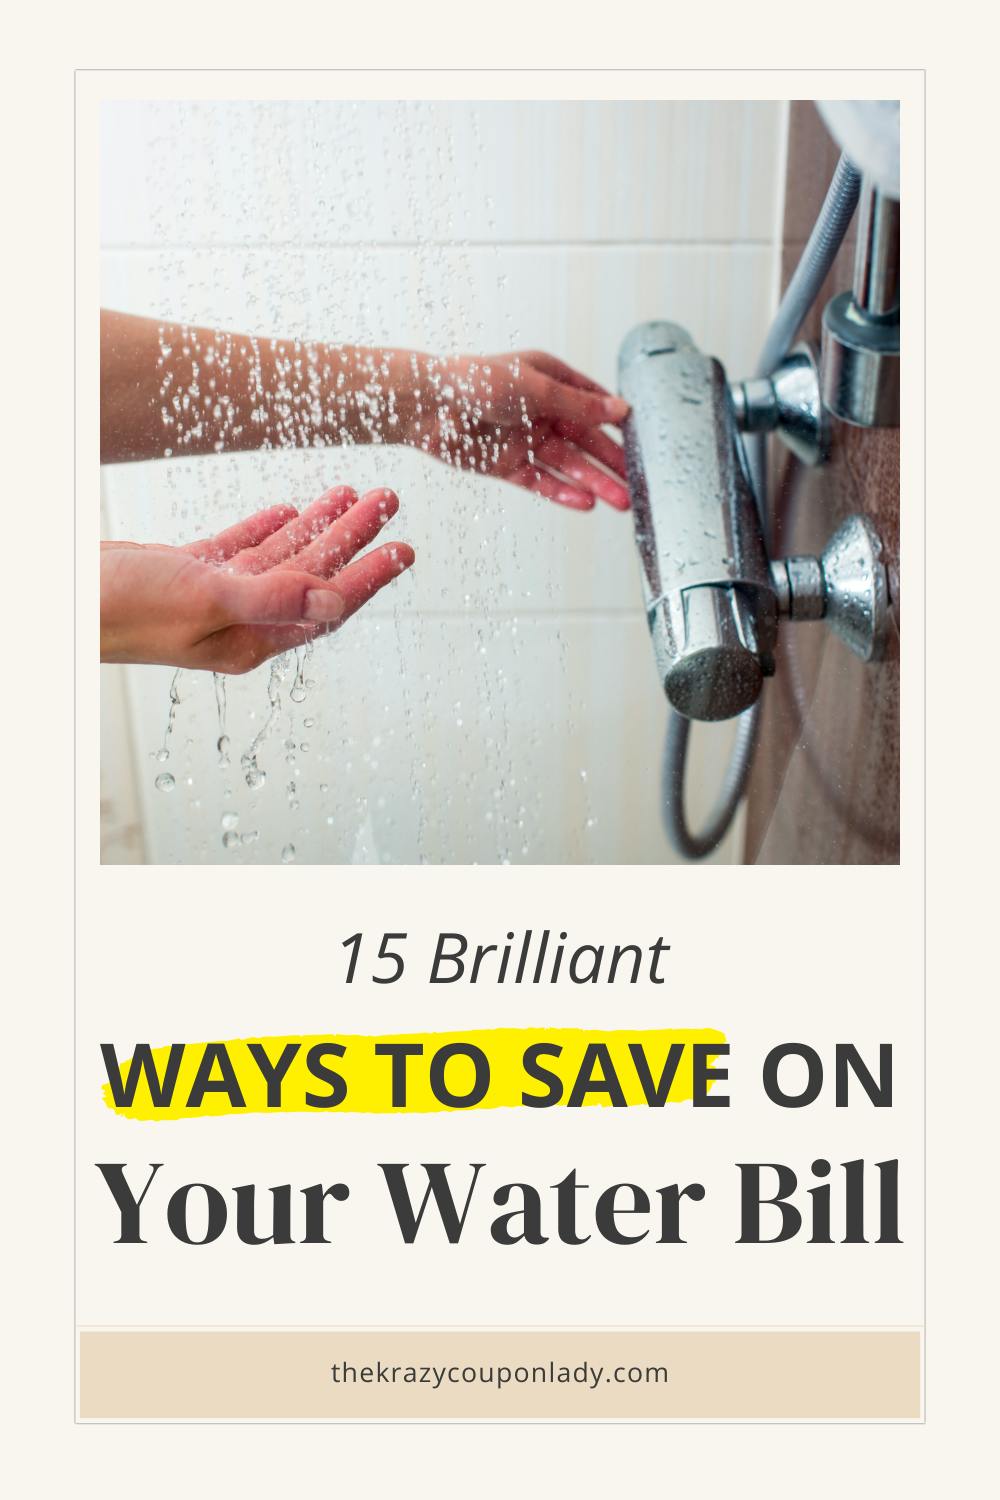 15 Ways to Save on Your Water Bill